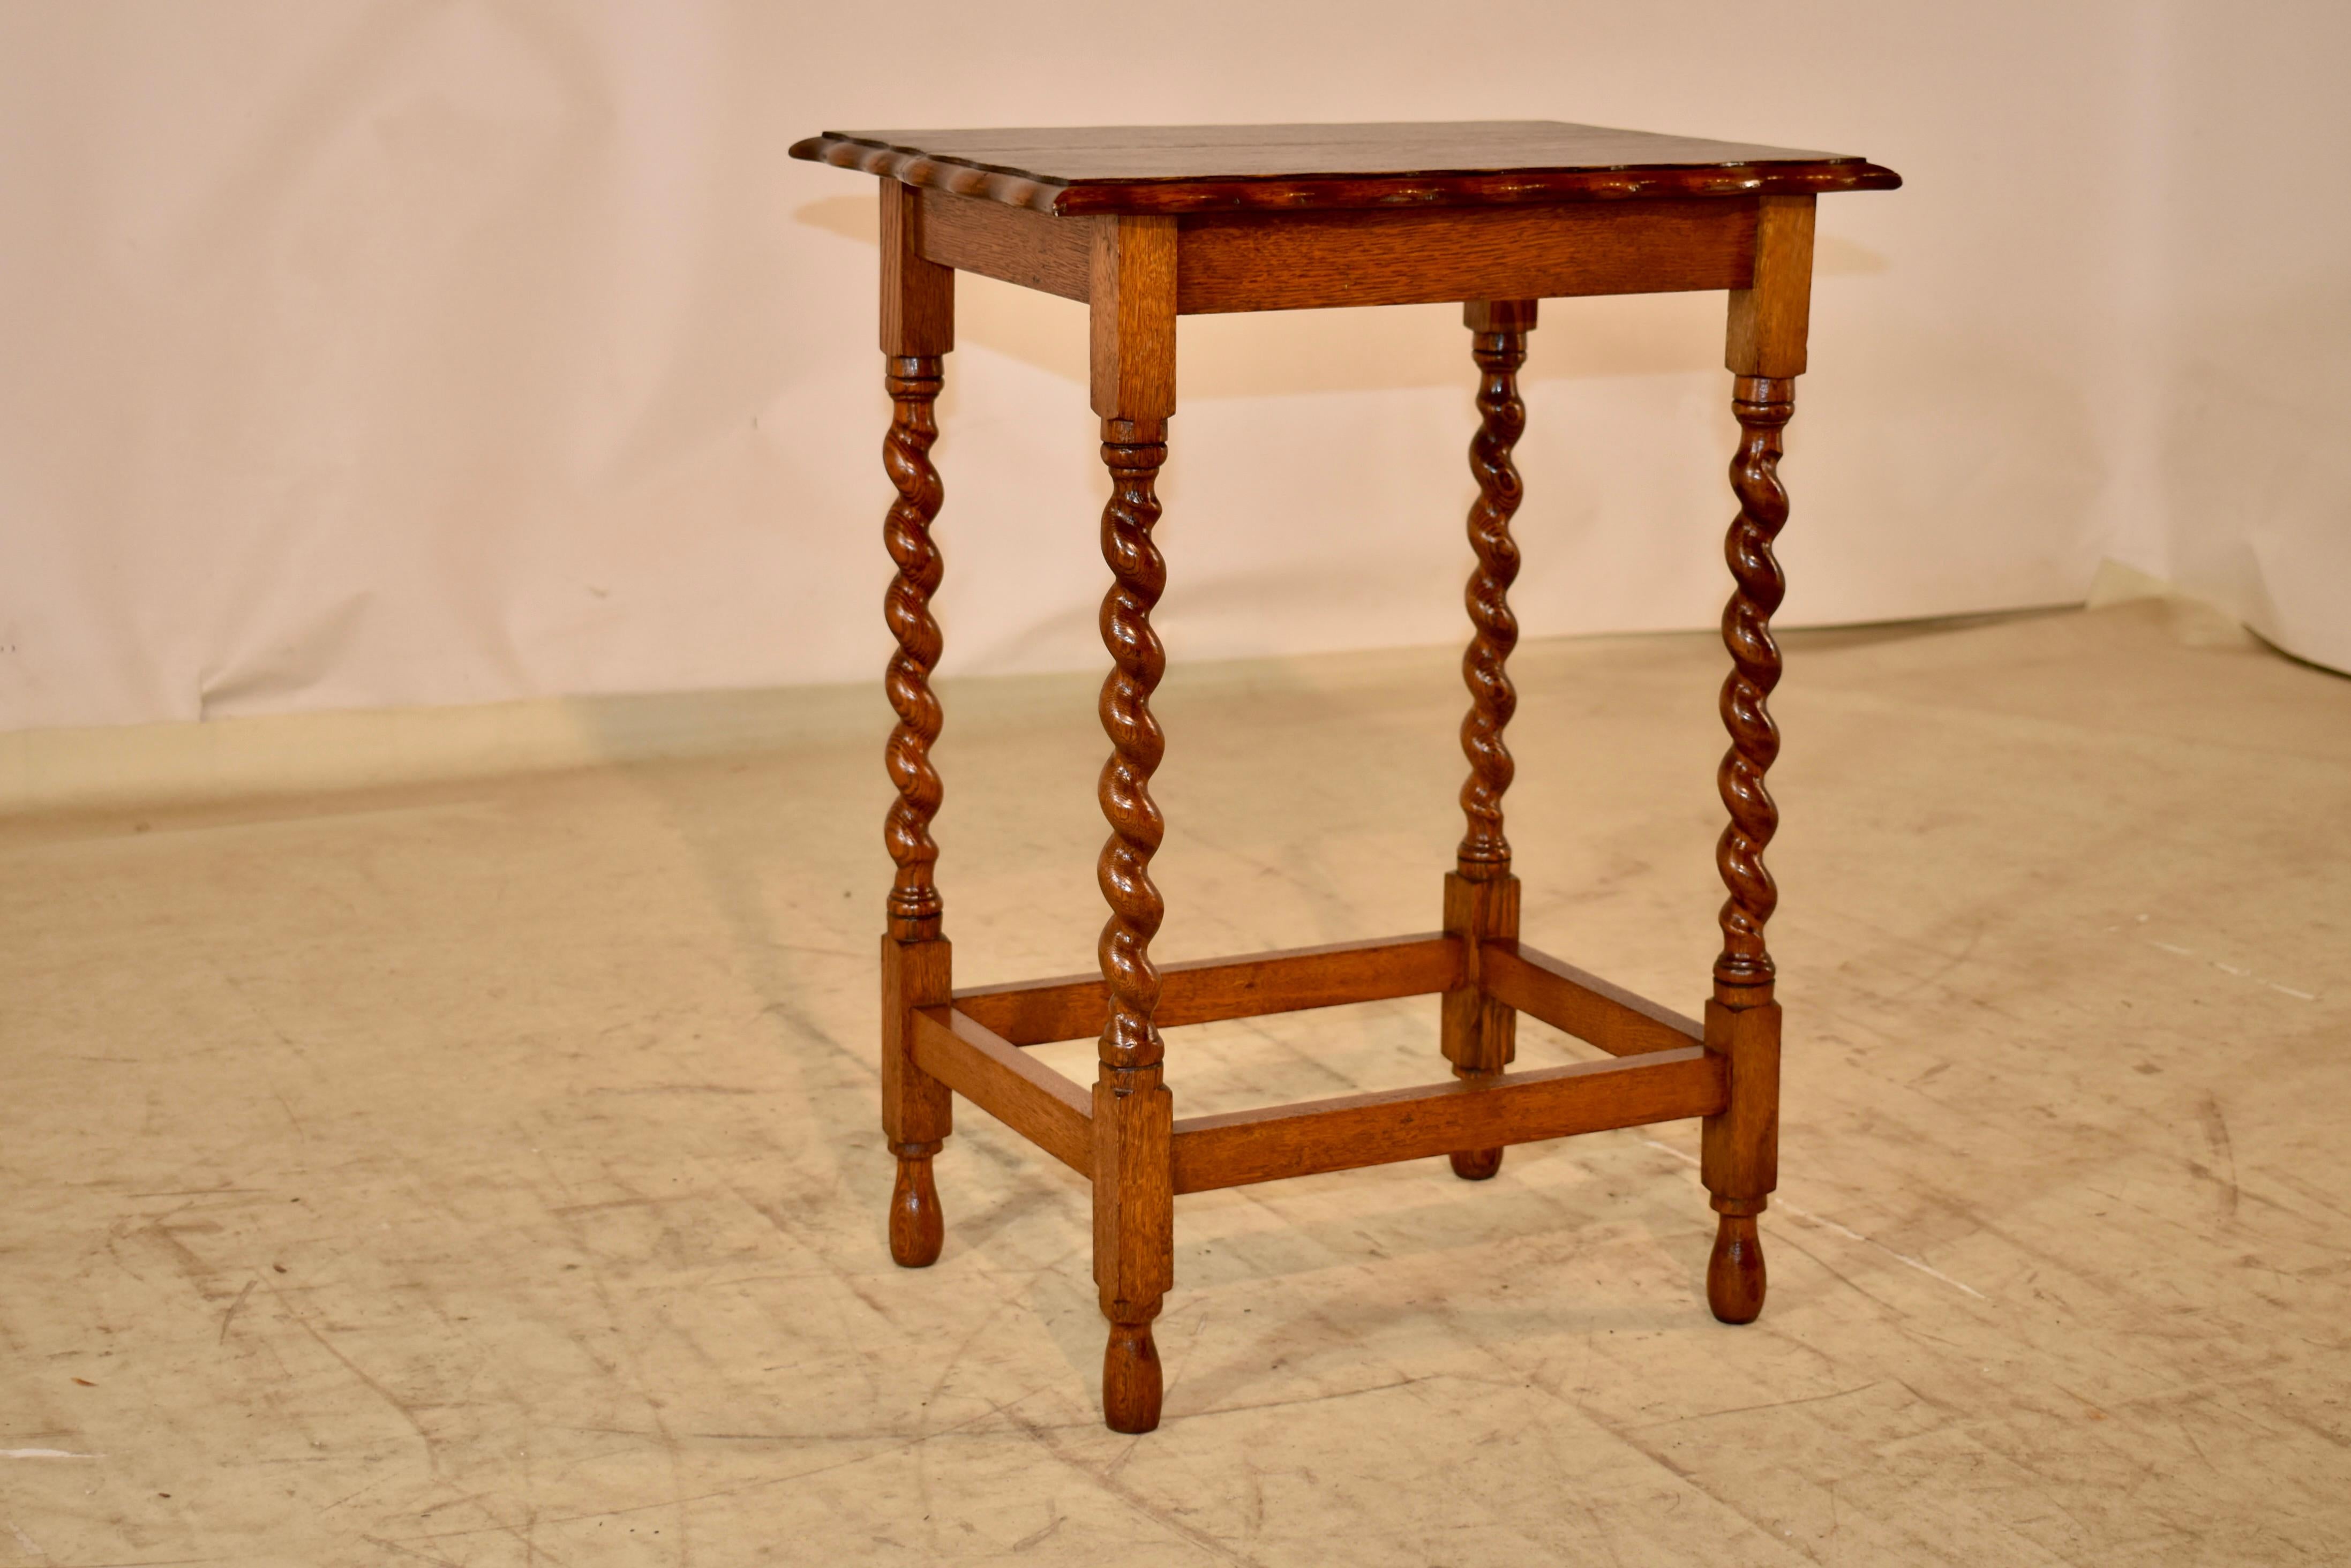 Period Edwardian oak side table from England.  The top is handsomely beveled and scalloped , and follows down to a simple apron.  The table is supported on hand turned barley twist legs, joined by simple stretchers and raised on hand turned feet.